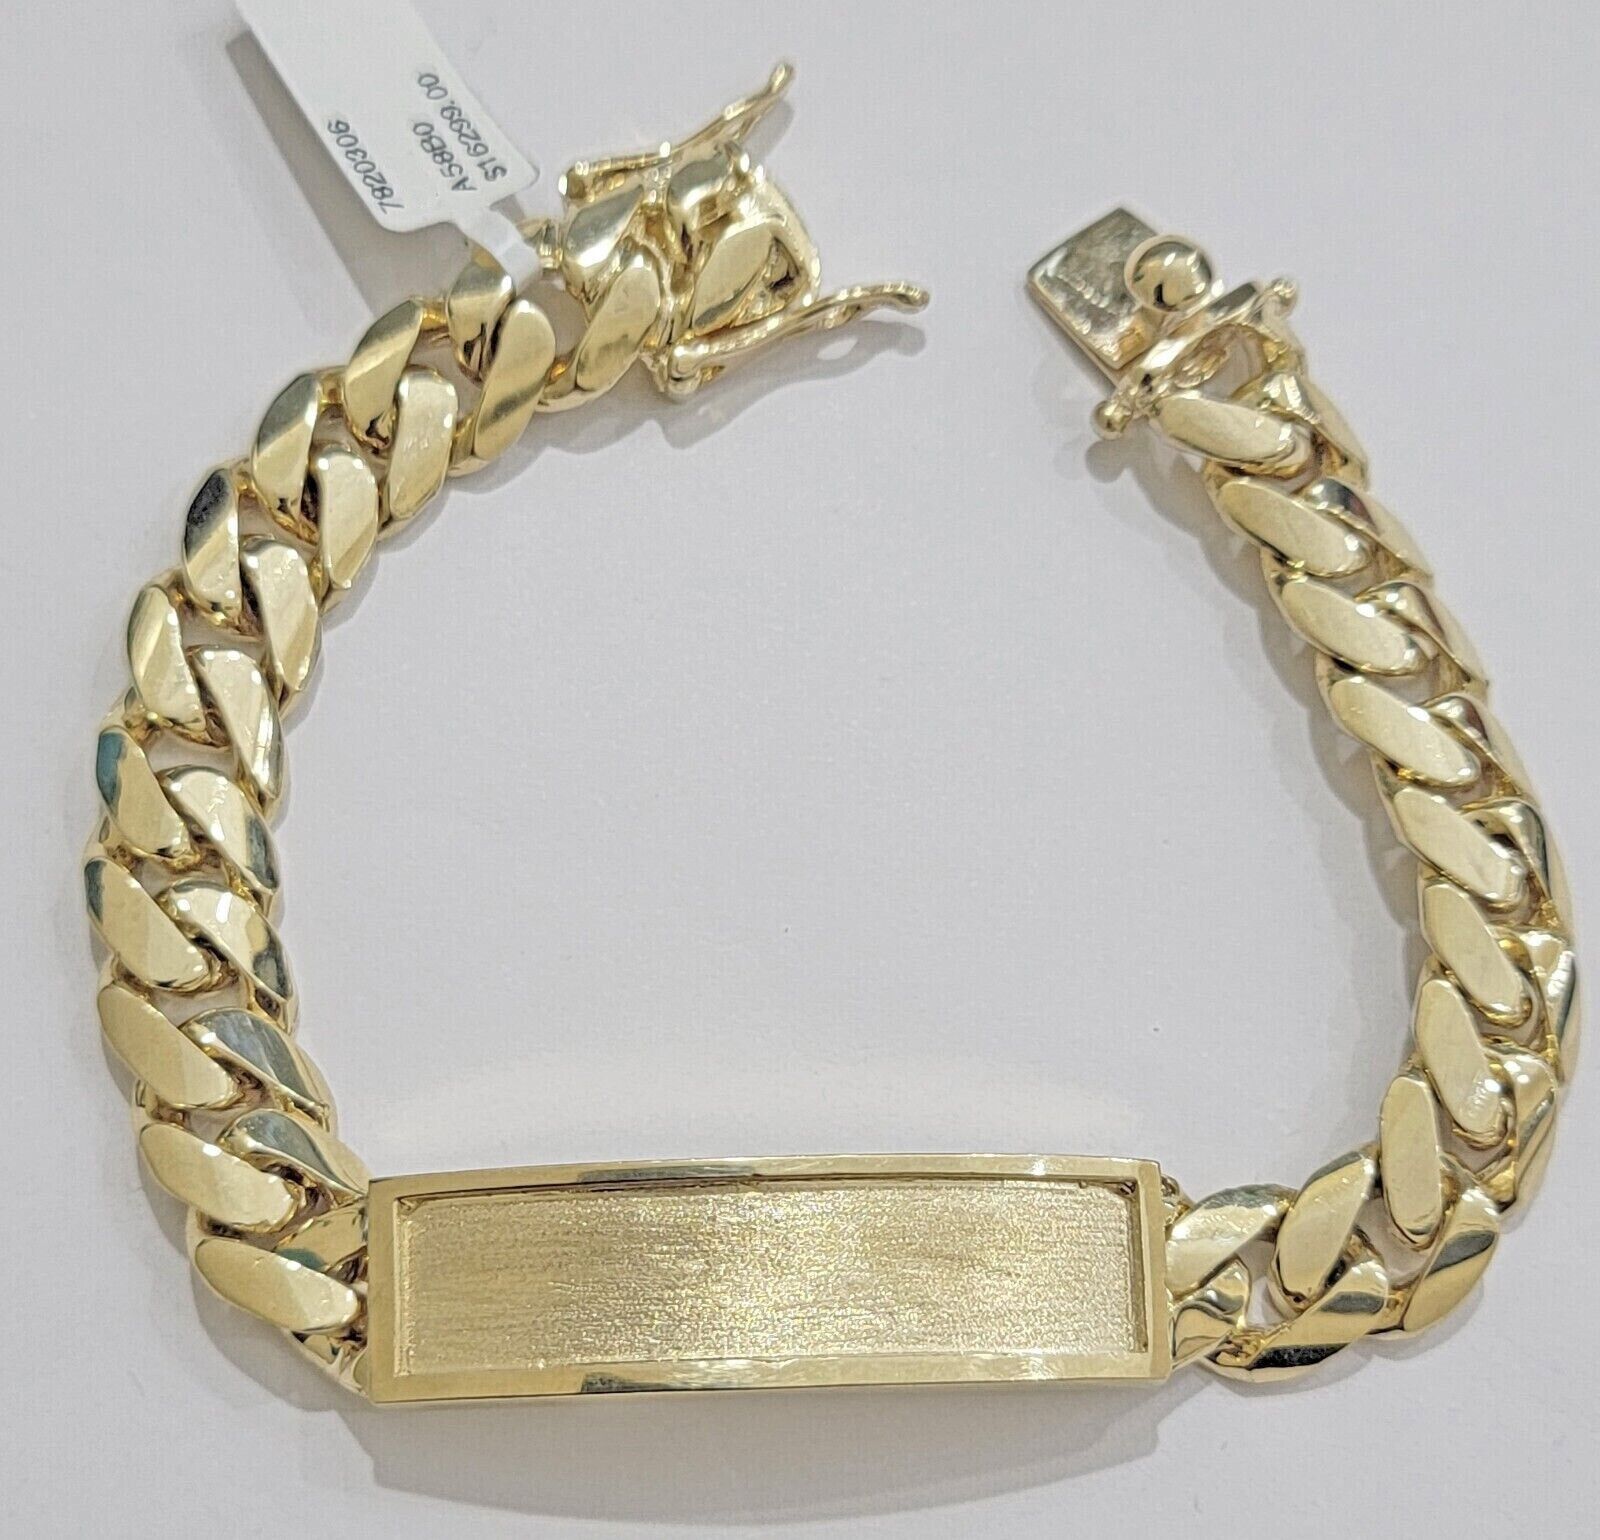 Solid 14k Bracelet Yellow Gold Miami Cuban link ID 12mm Name Plate 8.5" Box Lock